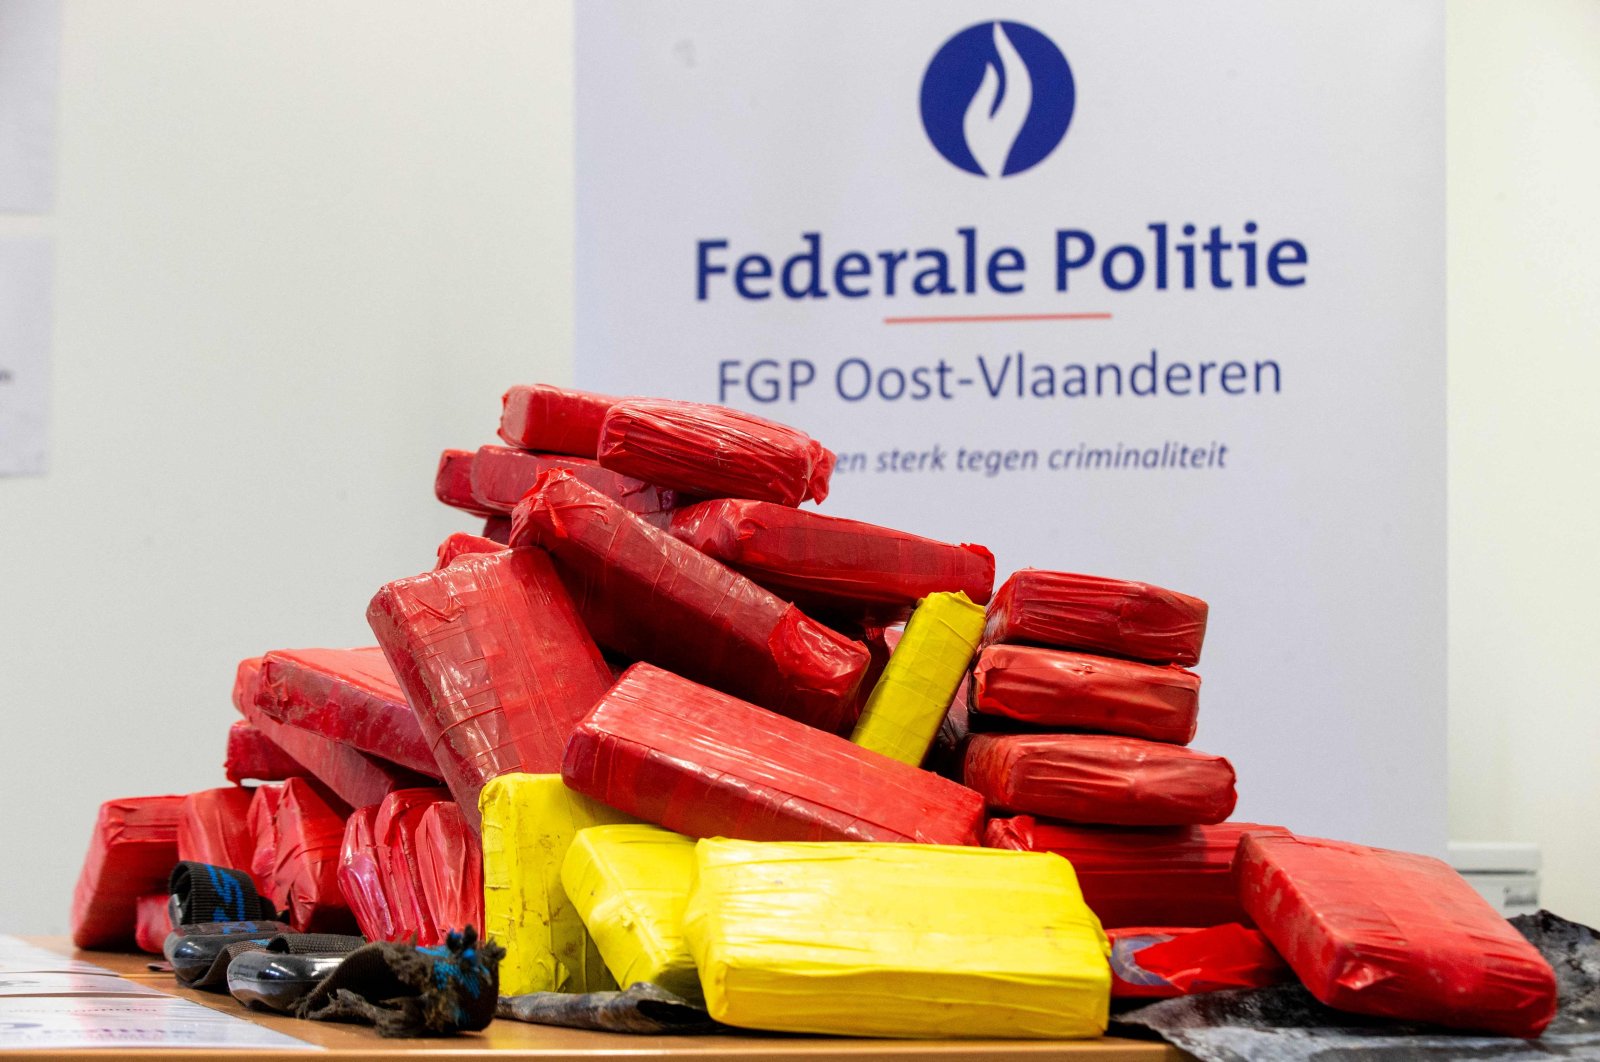 This photograph shows a seizure of some 200 kilograms of cocaine, at the Federal Police East Flanders station, in Dendermonde, Belgium, on June 25, 2021. (AFP Photo)